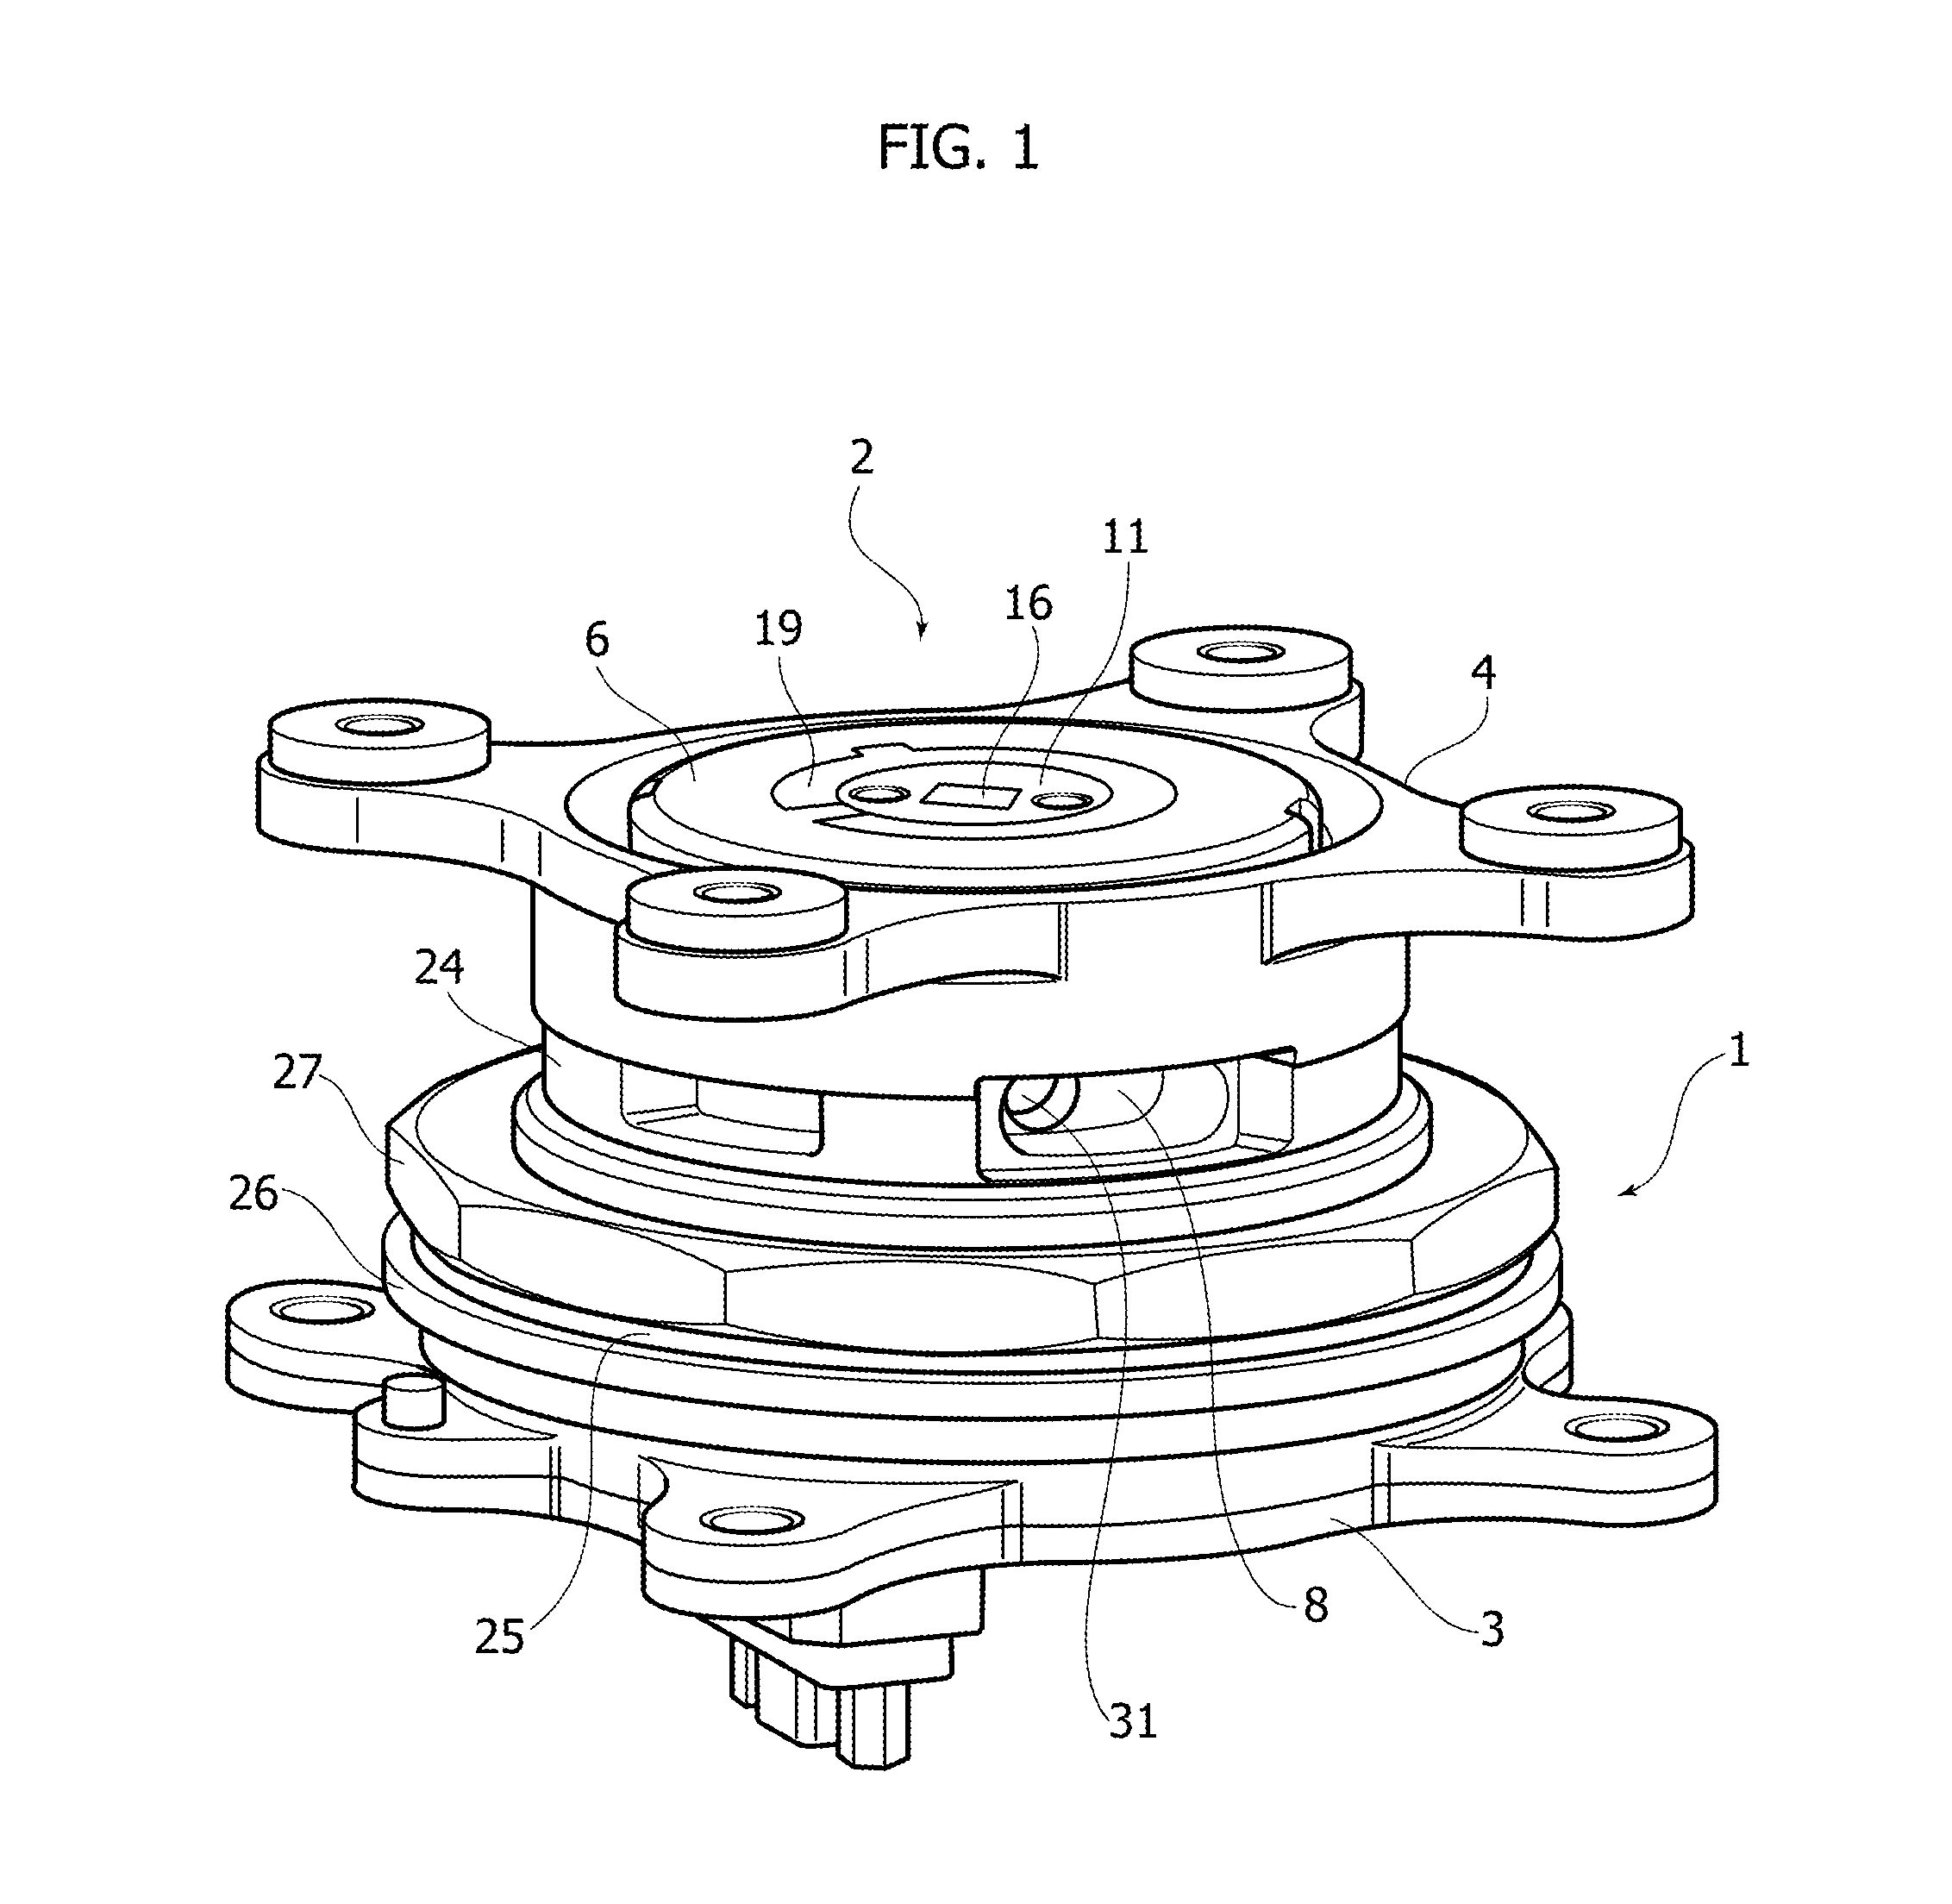 Device for holding and deploying apparatus for use in space